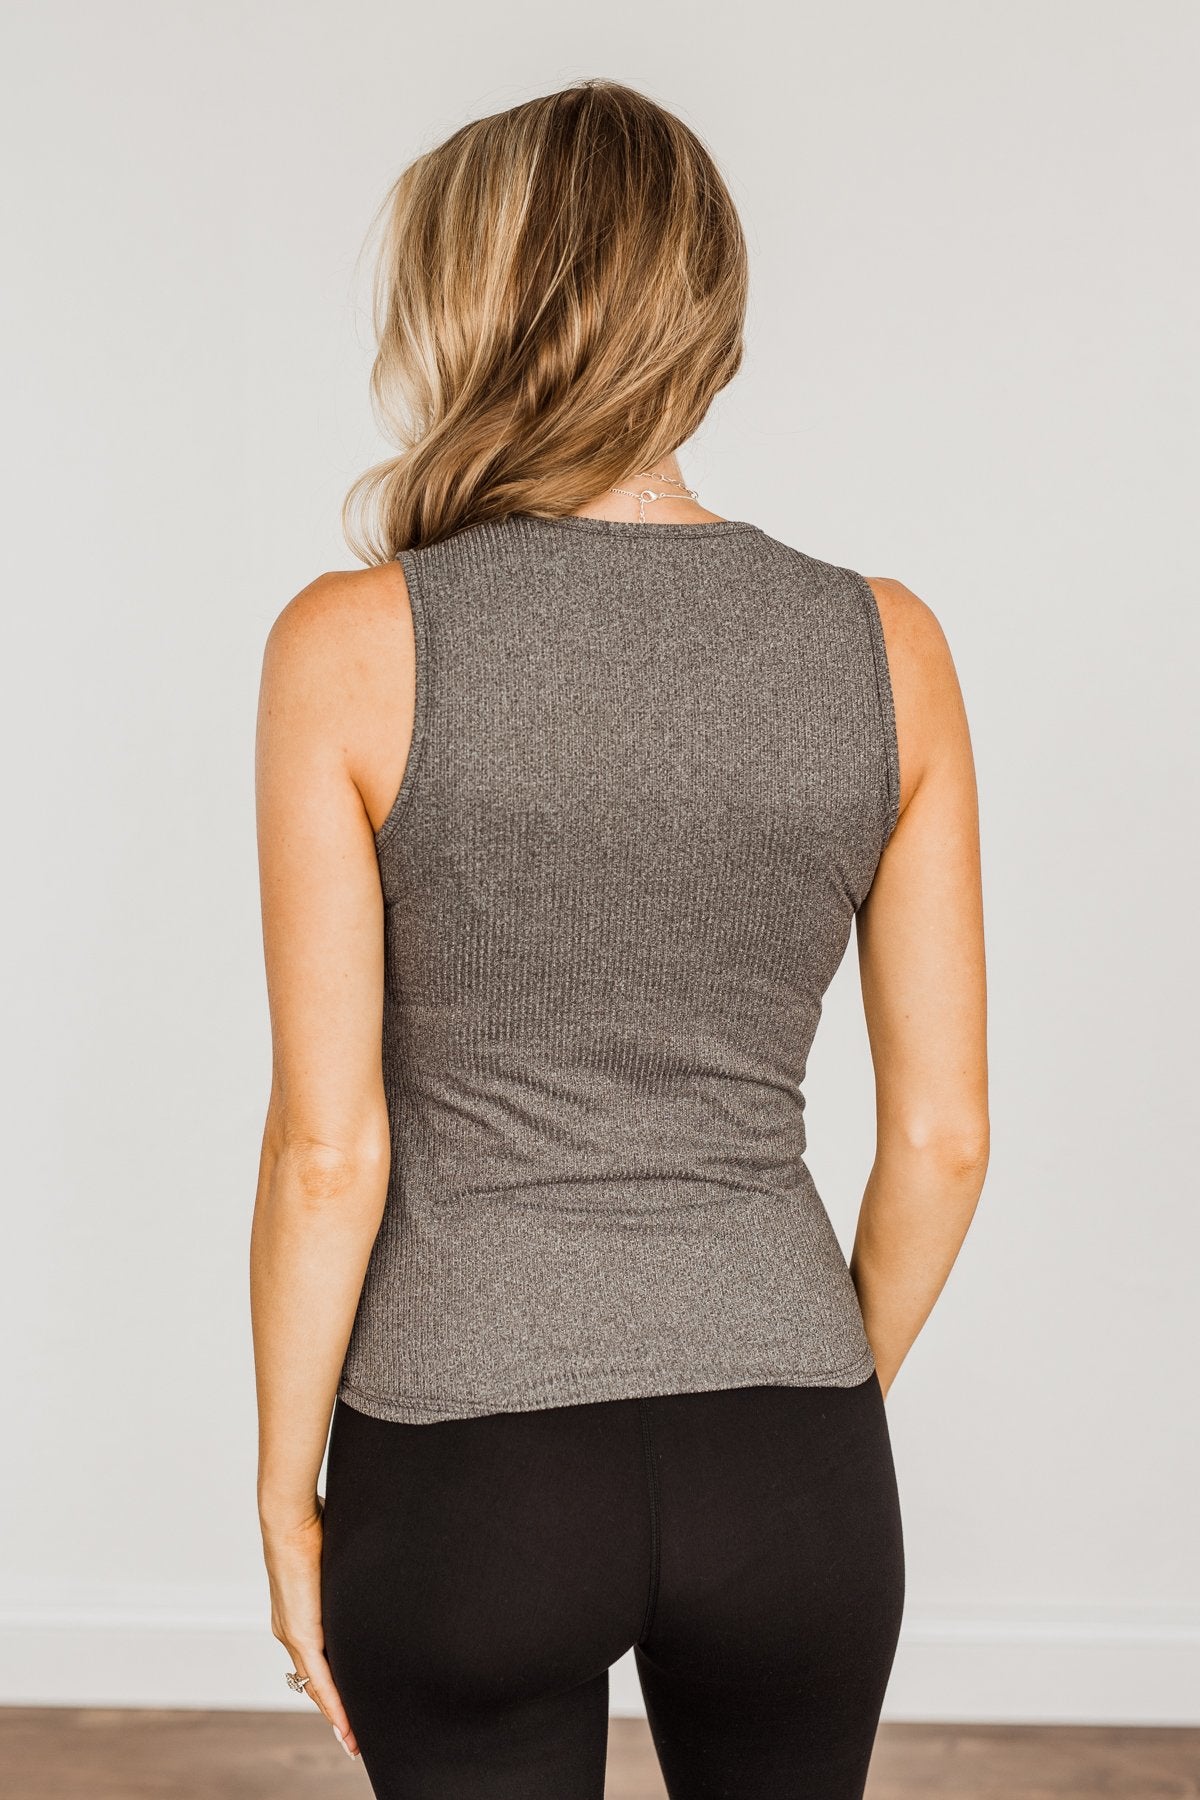 Wishes Come True Ribbed Knit Tank Top- Charcoal